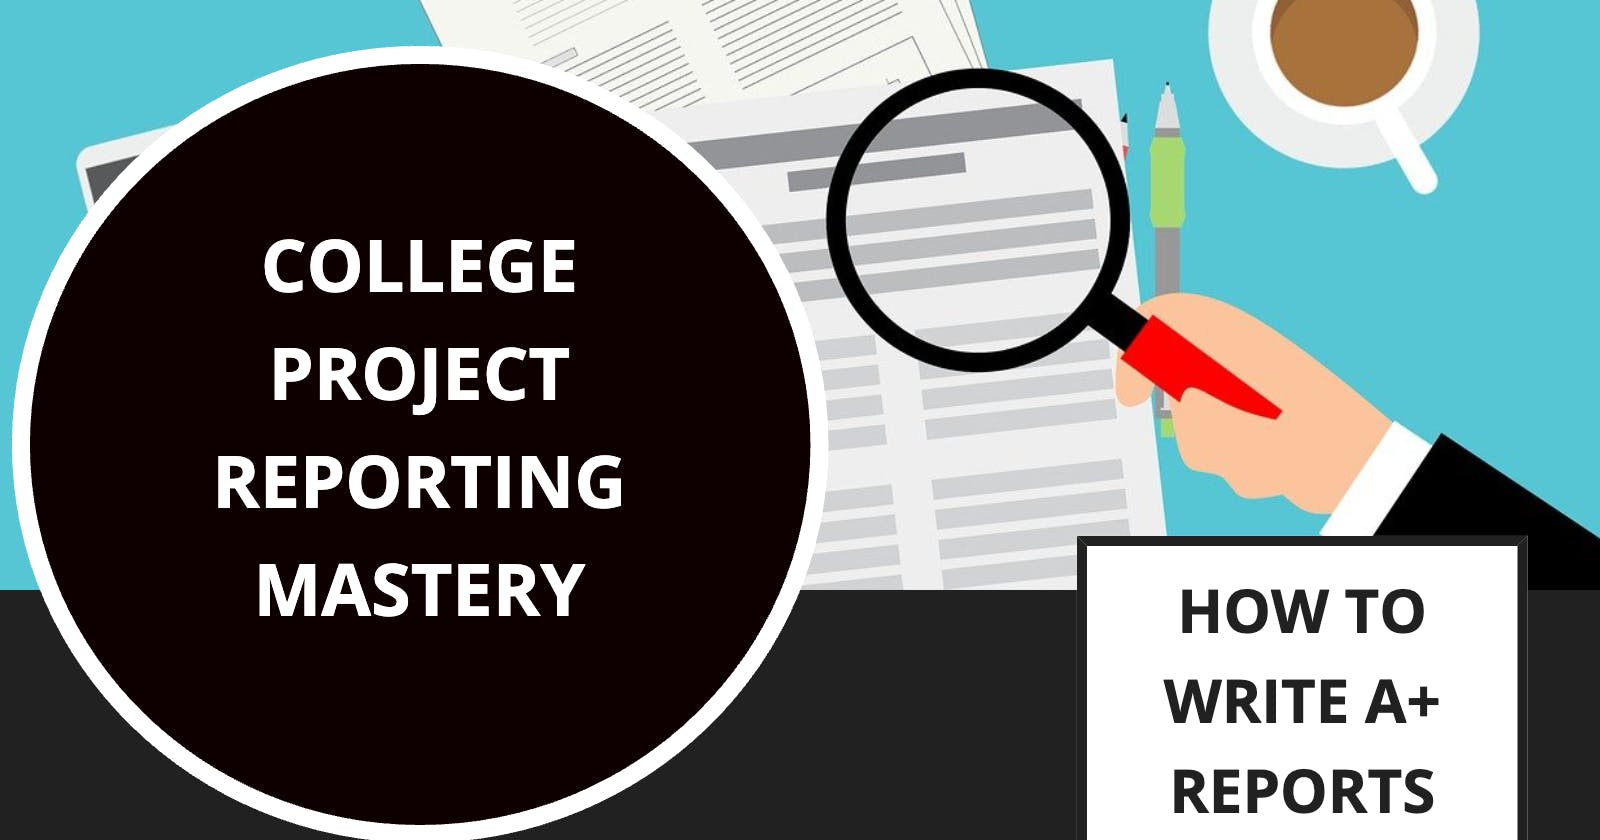 College Project Reporting Mastery: How to Write A+ Reports